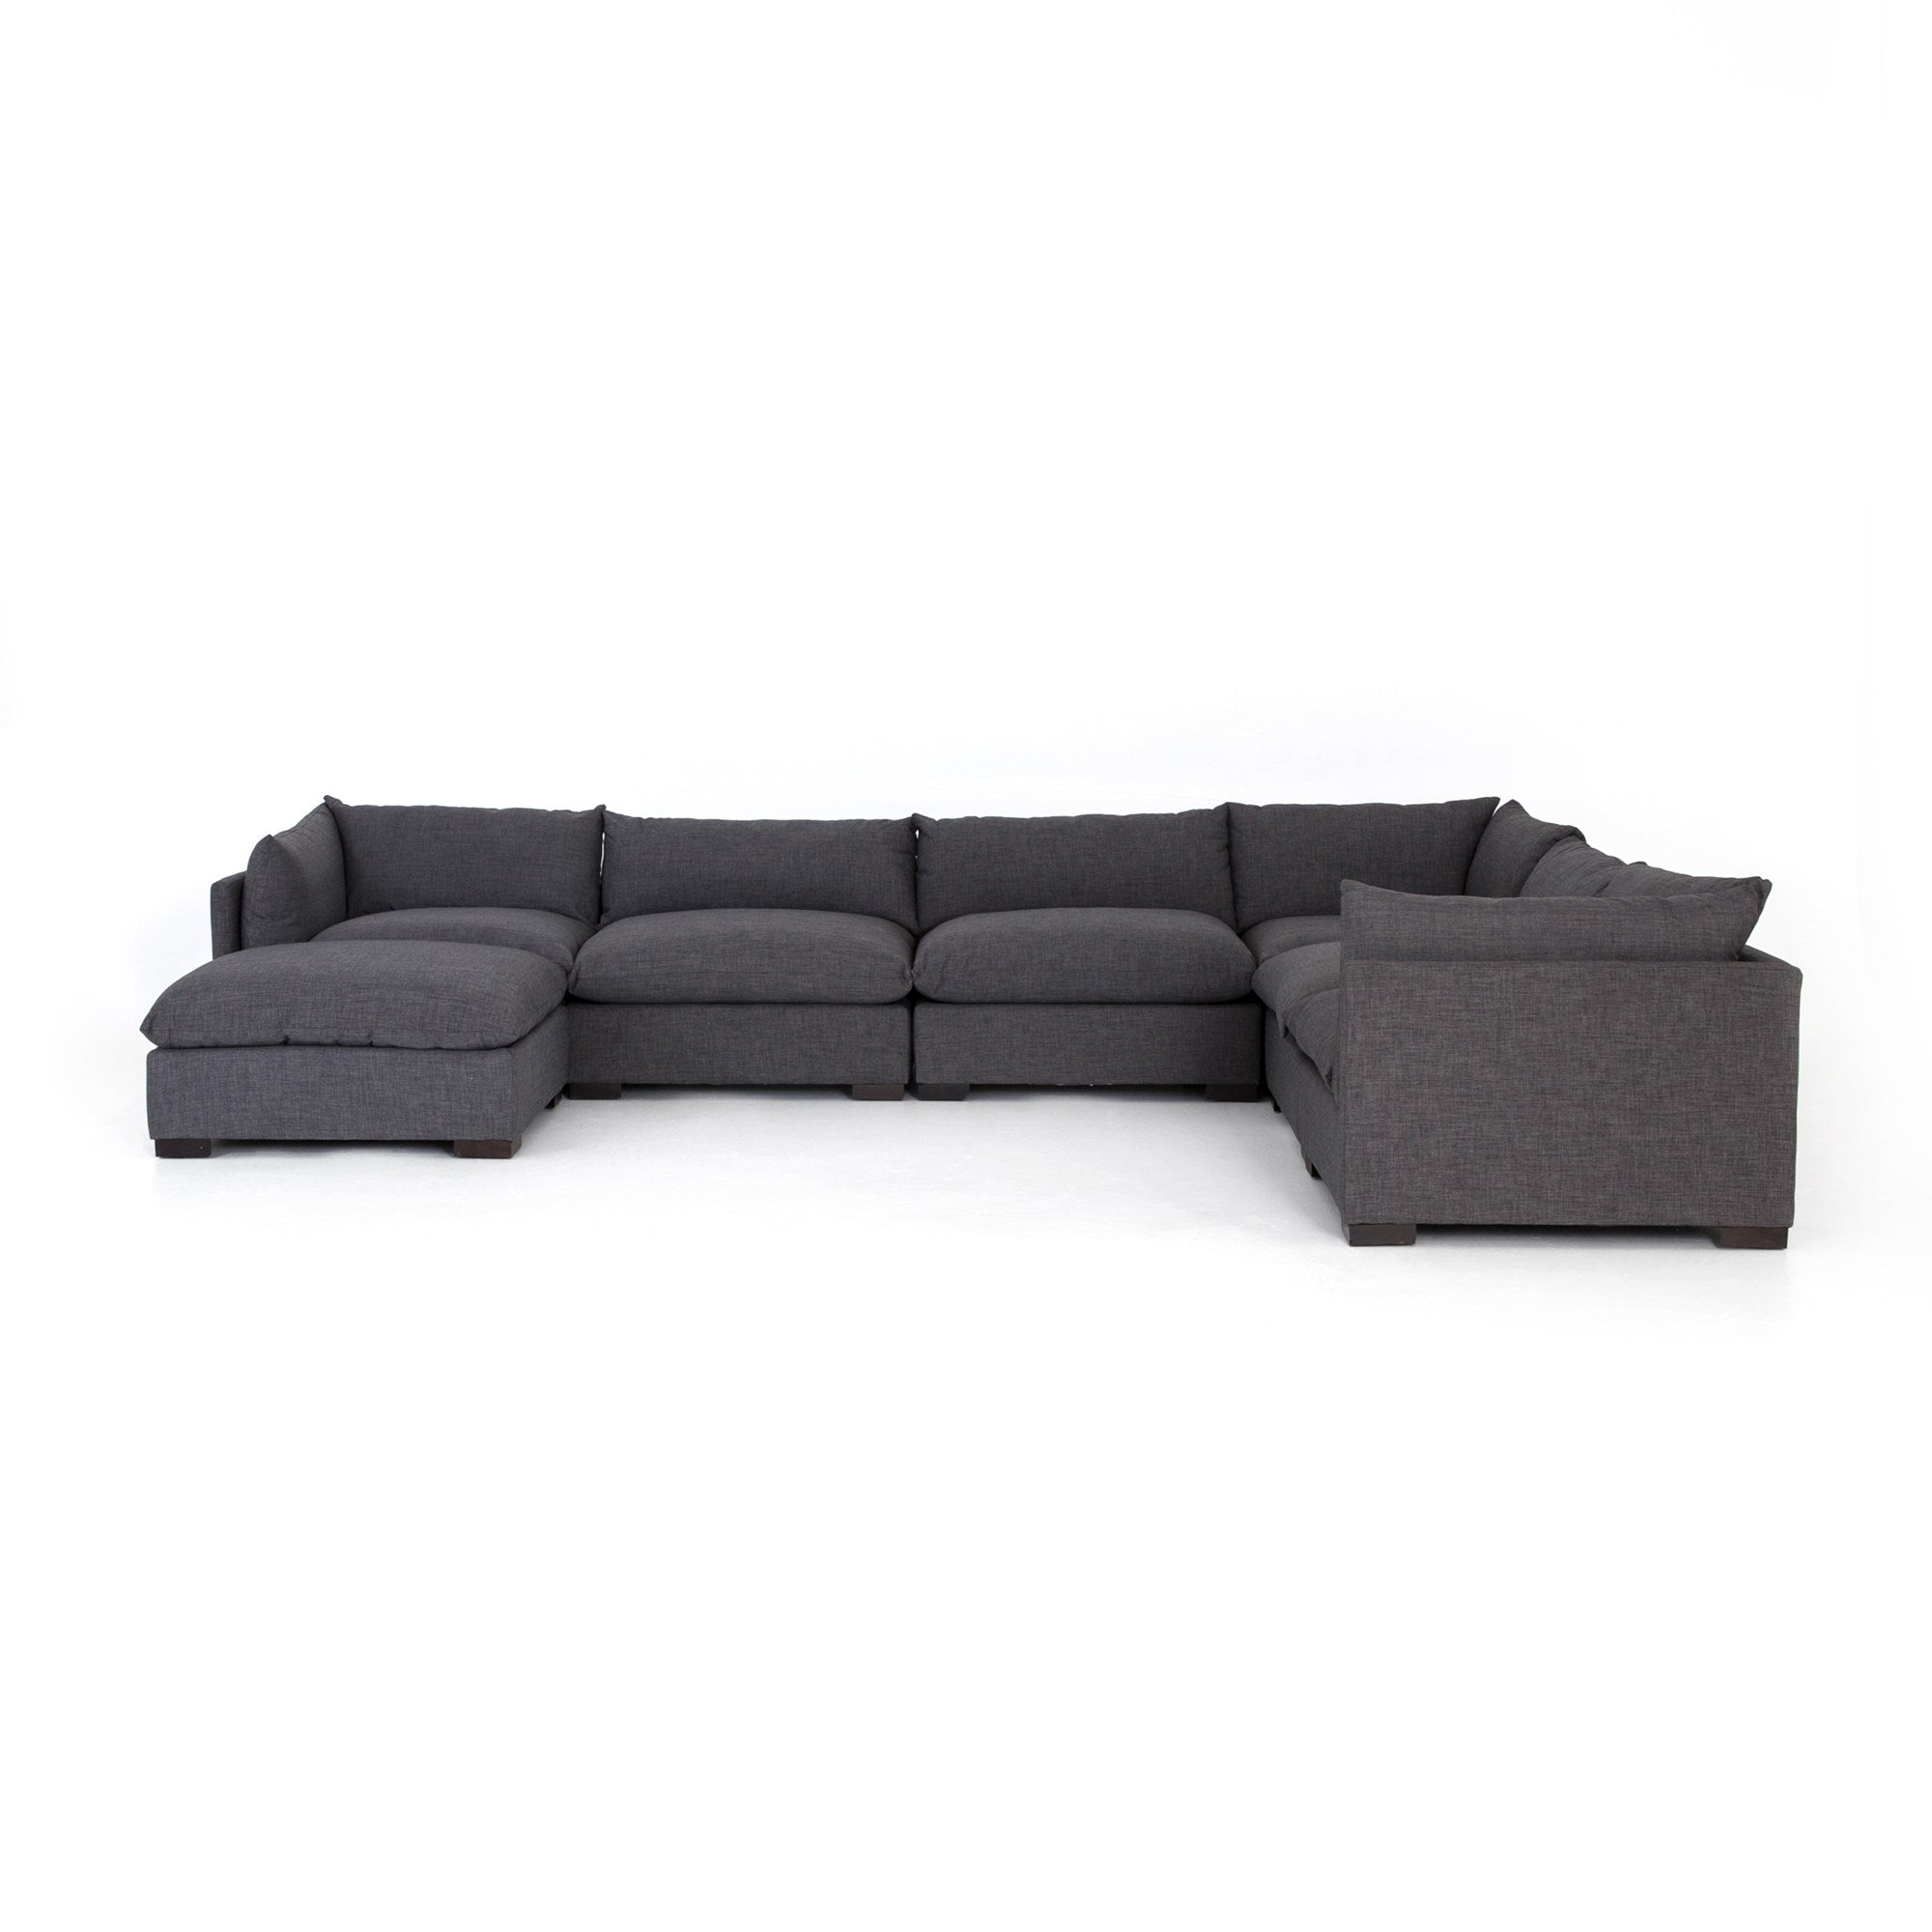 Westwood 6 Piece Sectional with Ottoman